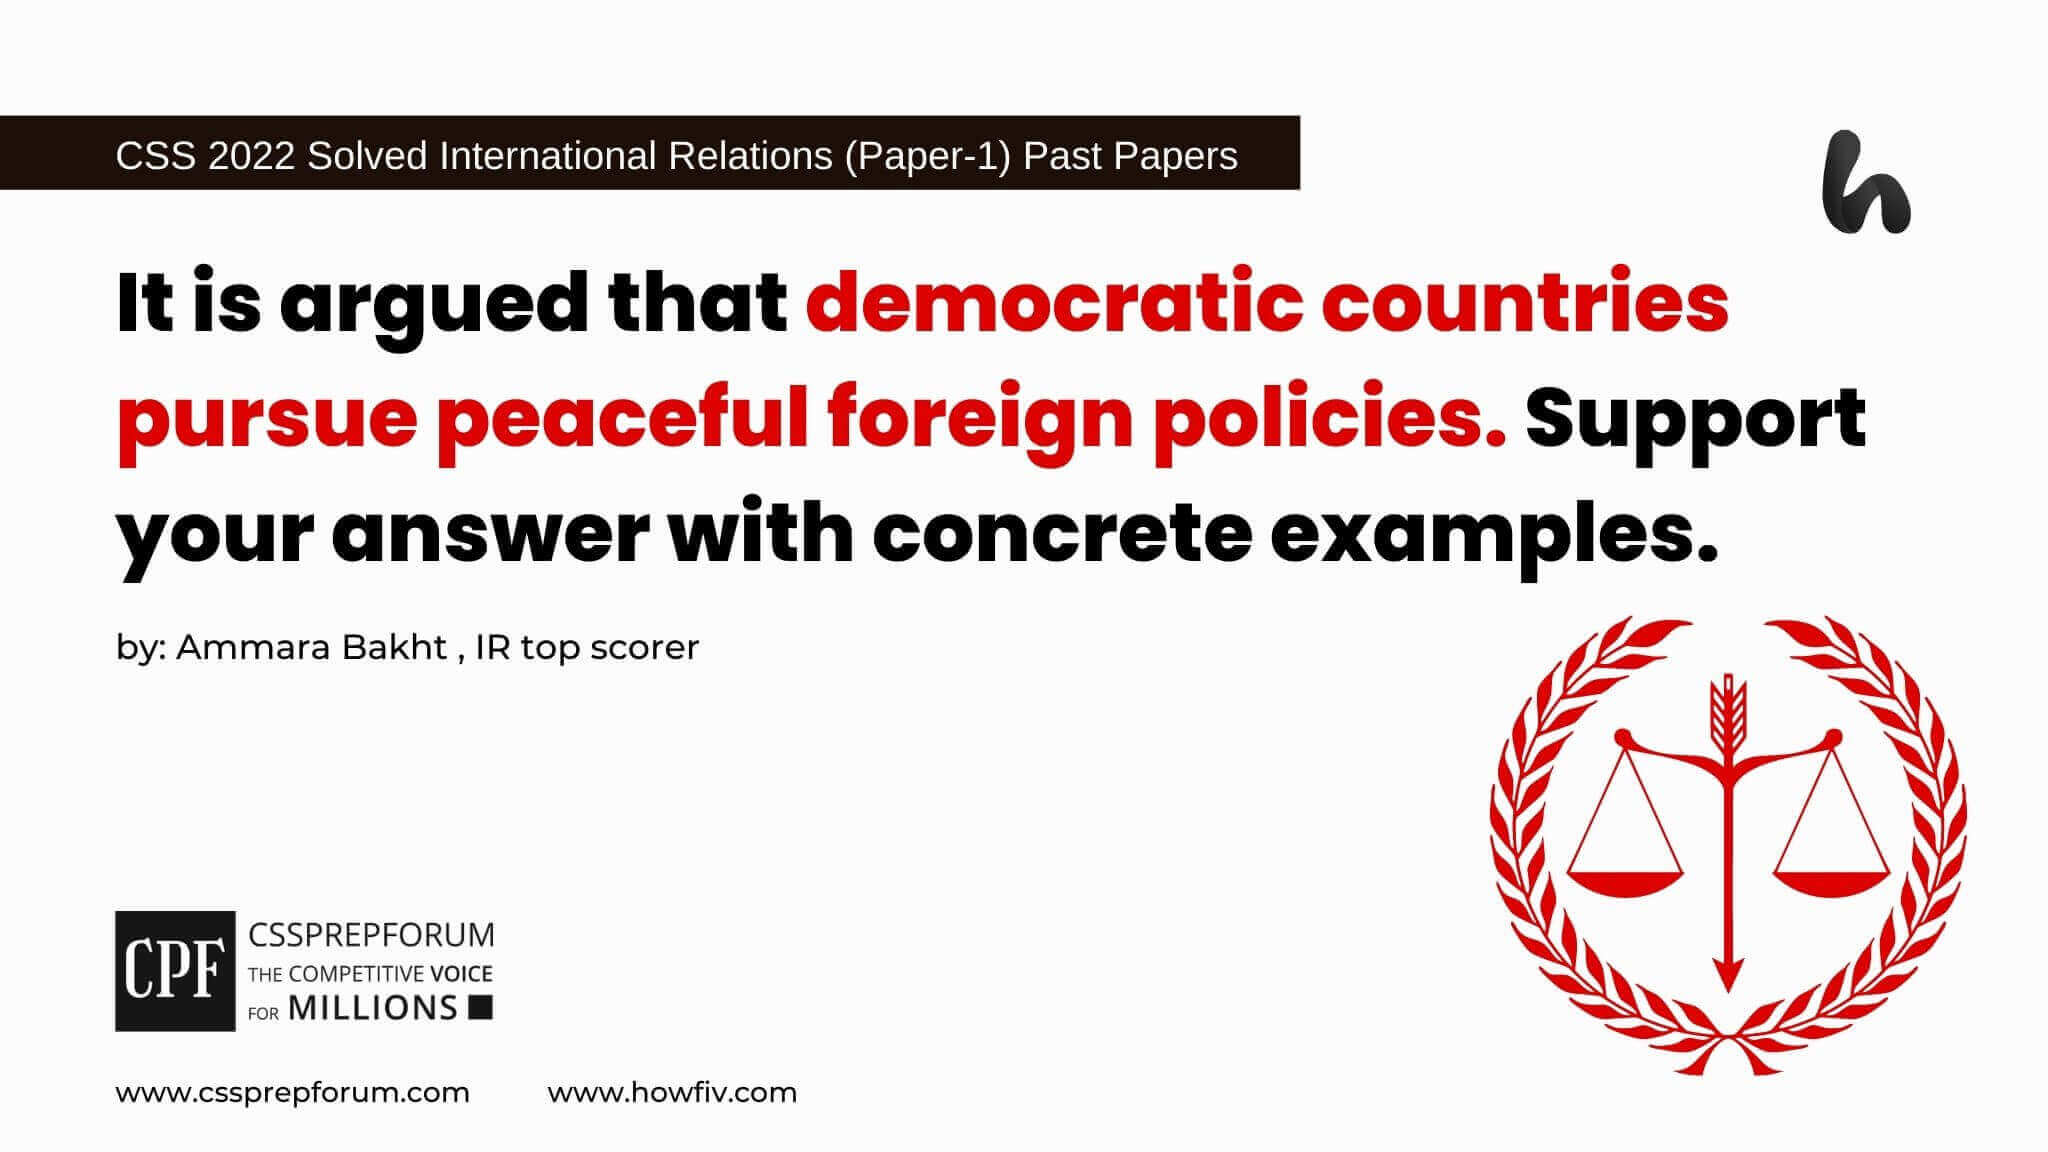 It is argued that democratic countries pursue peaceful foreign policies. Support your answer with concrete examples.